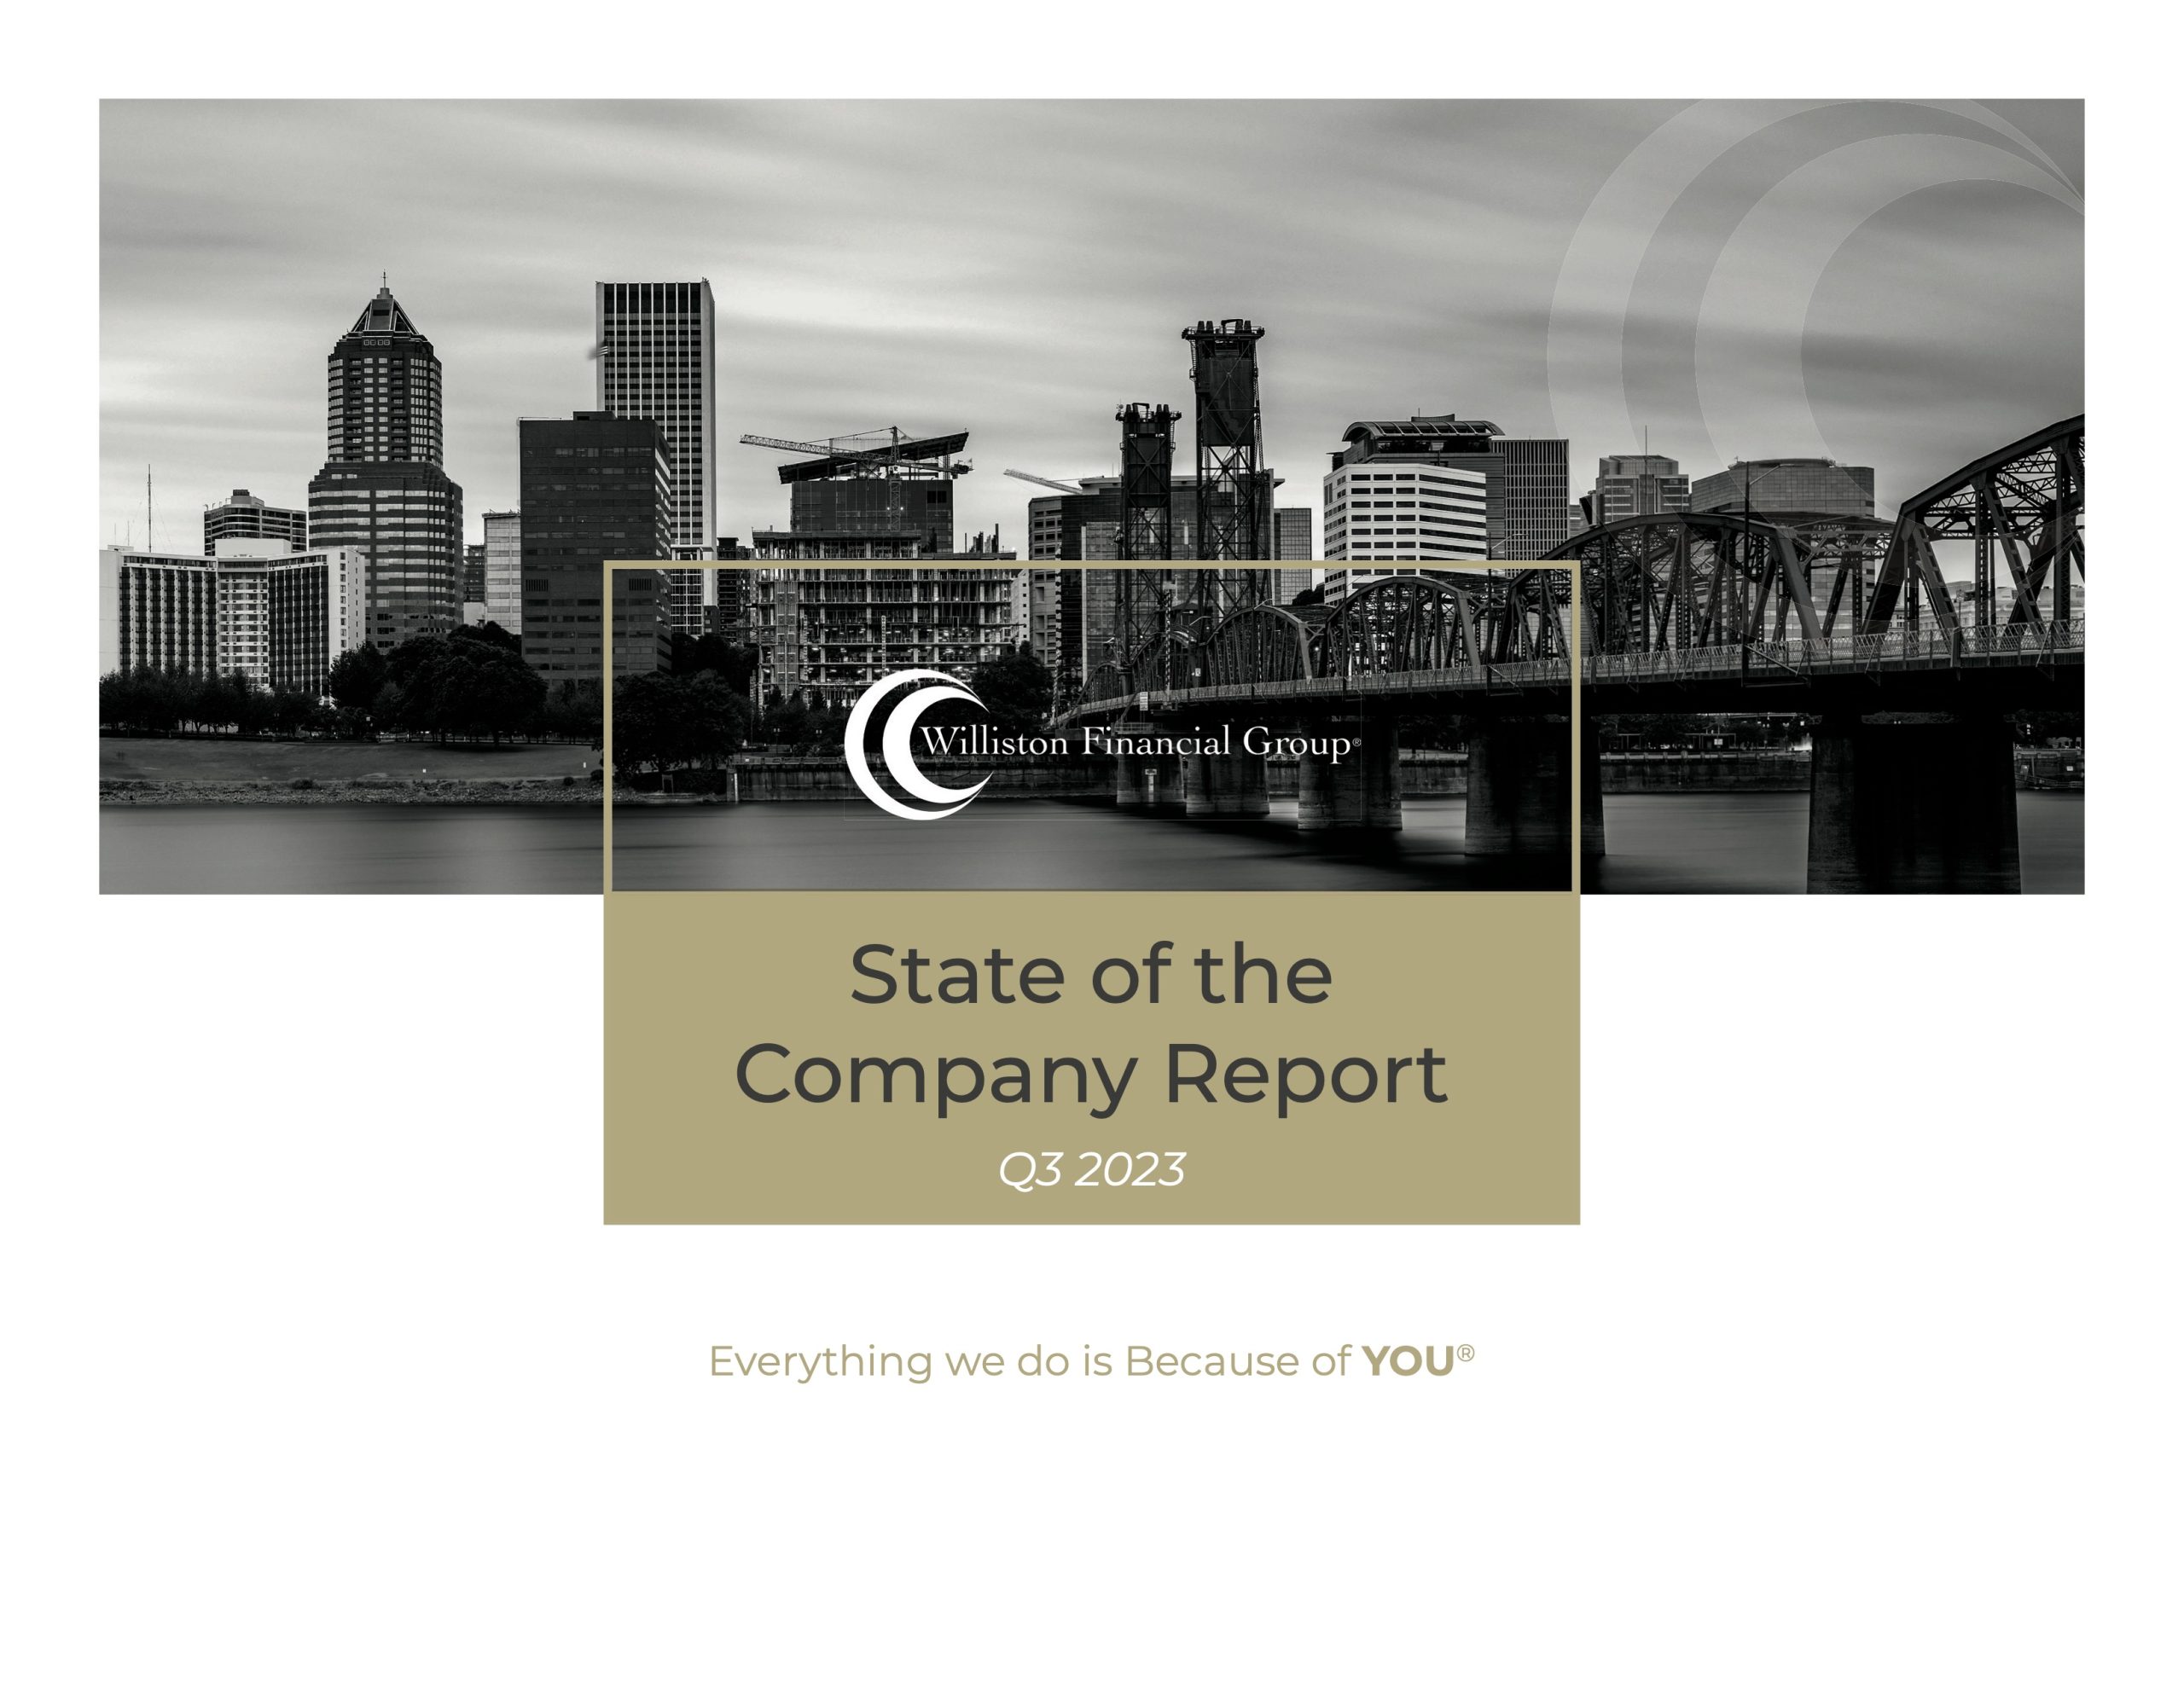 STATE OF THE COMPANY REPORT